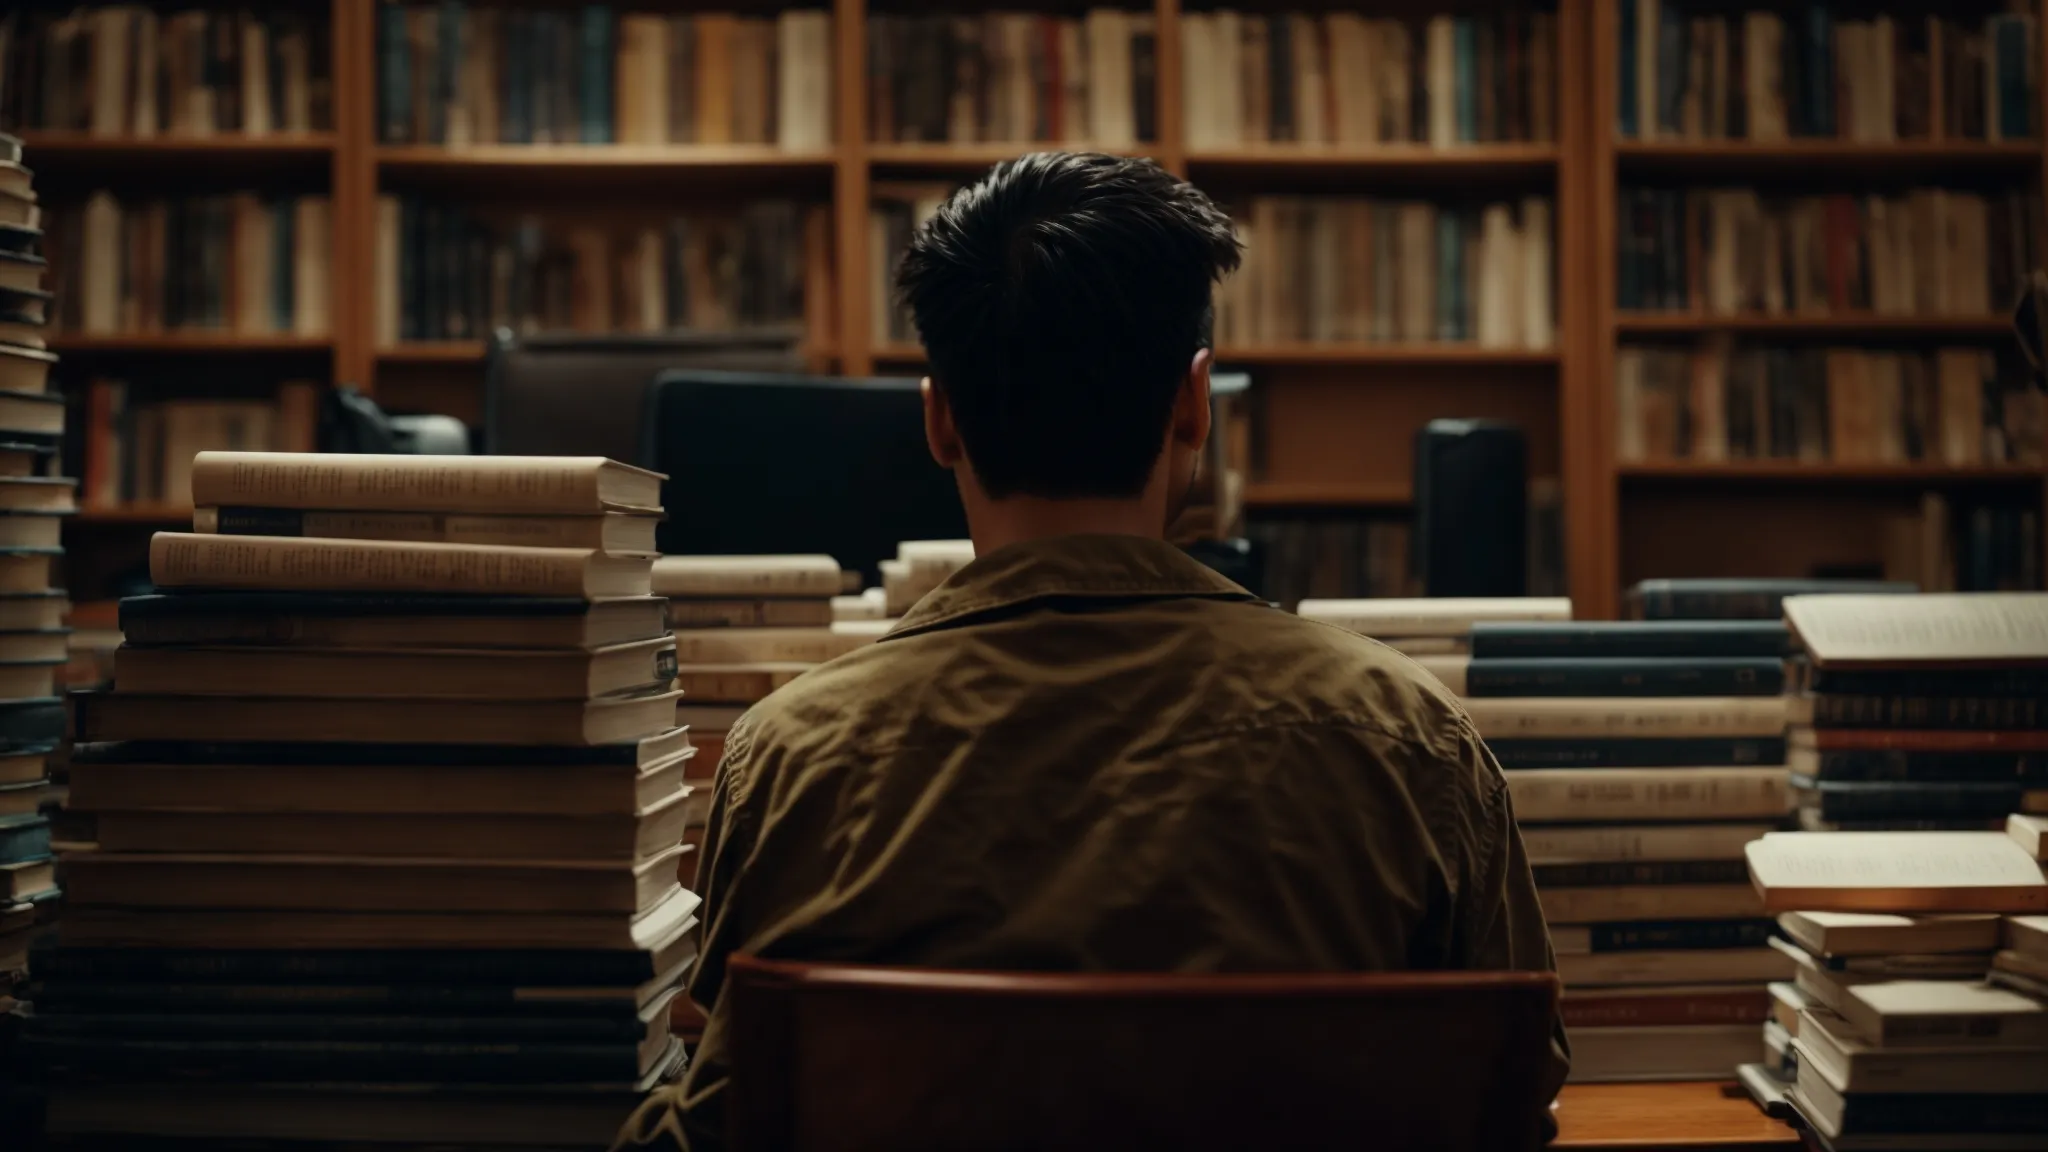 a person sitting in front of a computer, surrounded by books, deeply focused on the screen.